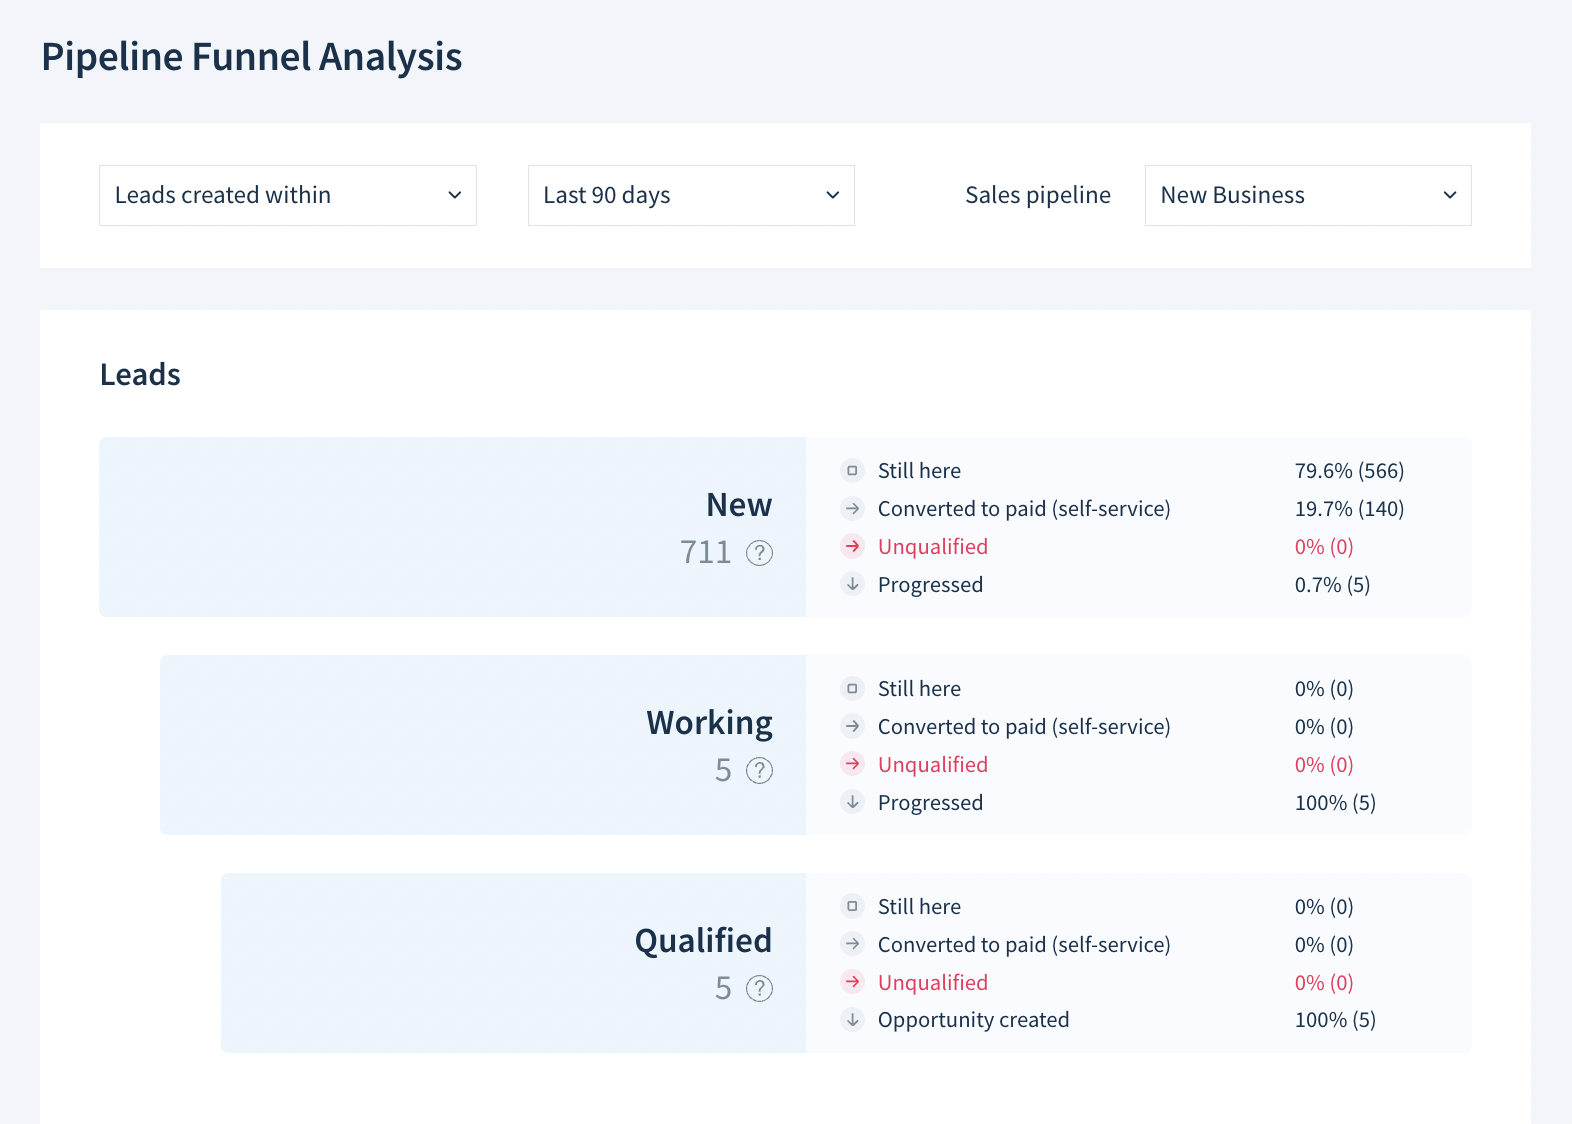 Pipeline Funnel Analysis showing a breakdown of new, working, and qualified leads